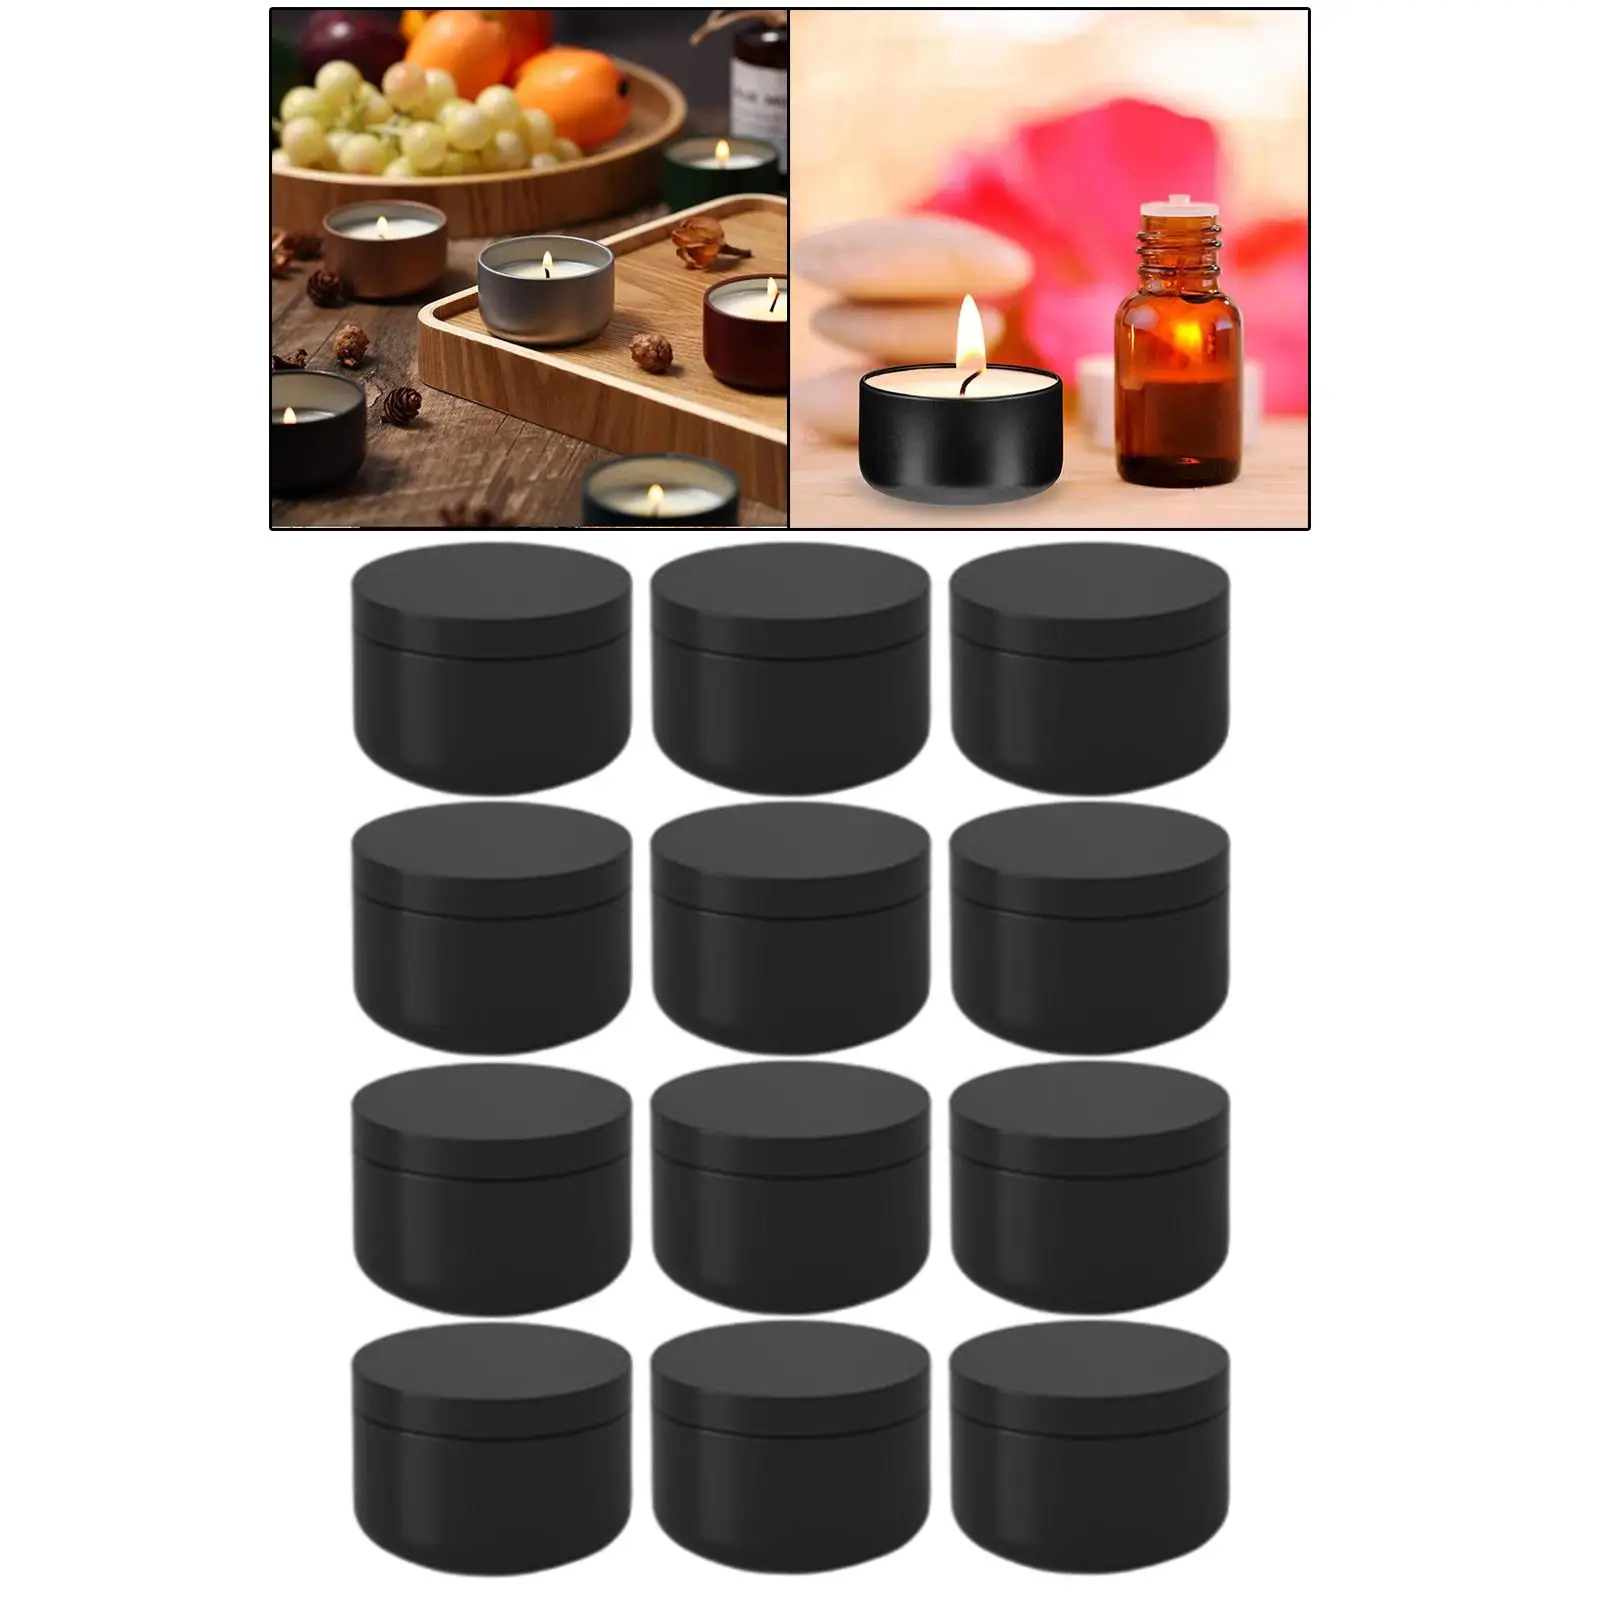 12 Pieces Small Tea Cans 50ml Wear Resistant Anti Drop with Buckle Reusable Containers for Cosmetics Sweets Travel Men Women